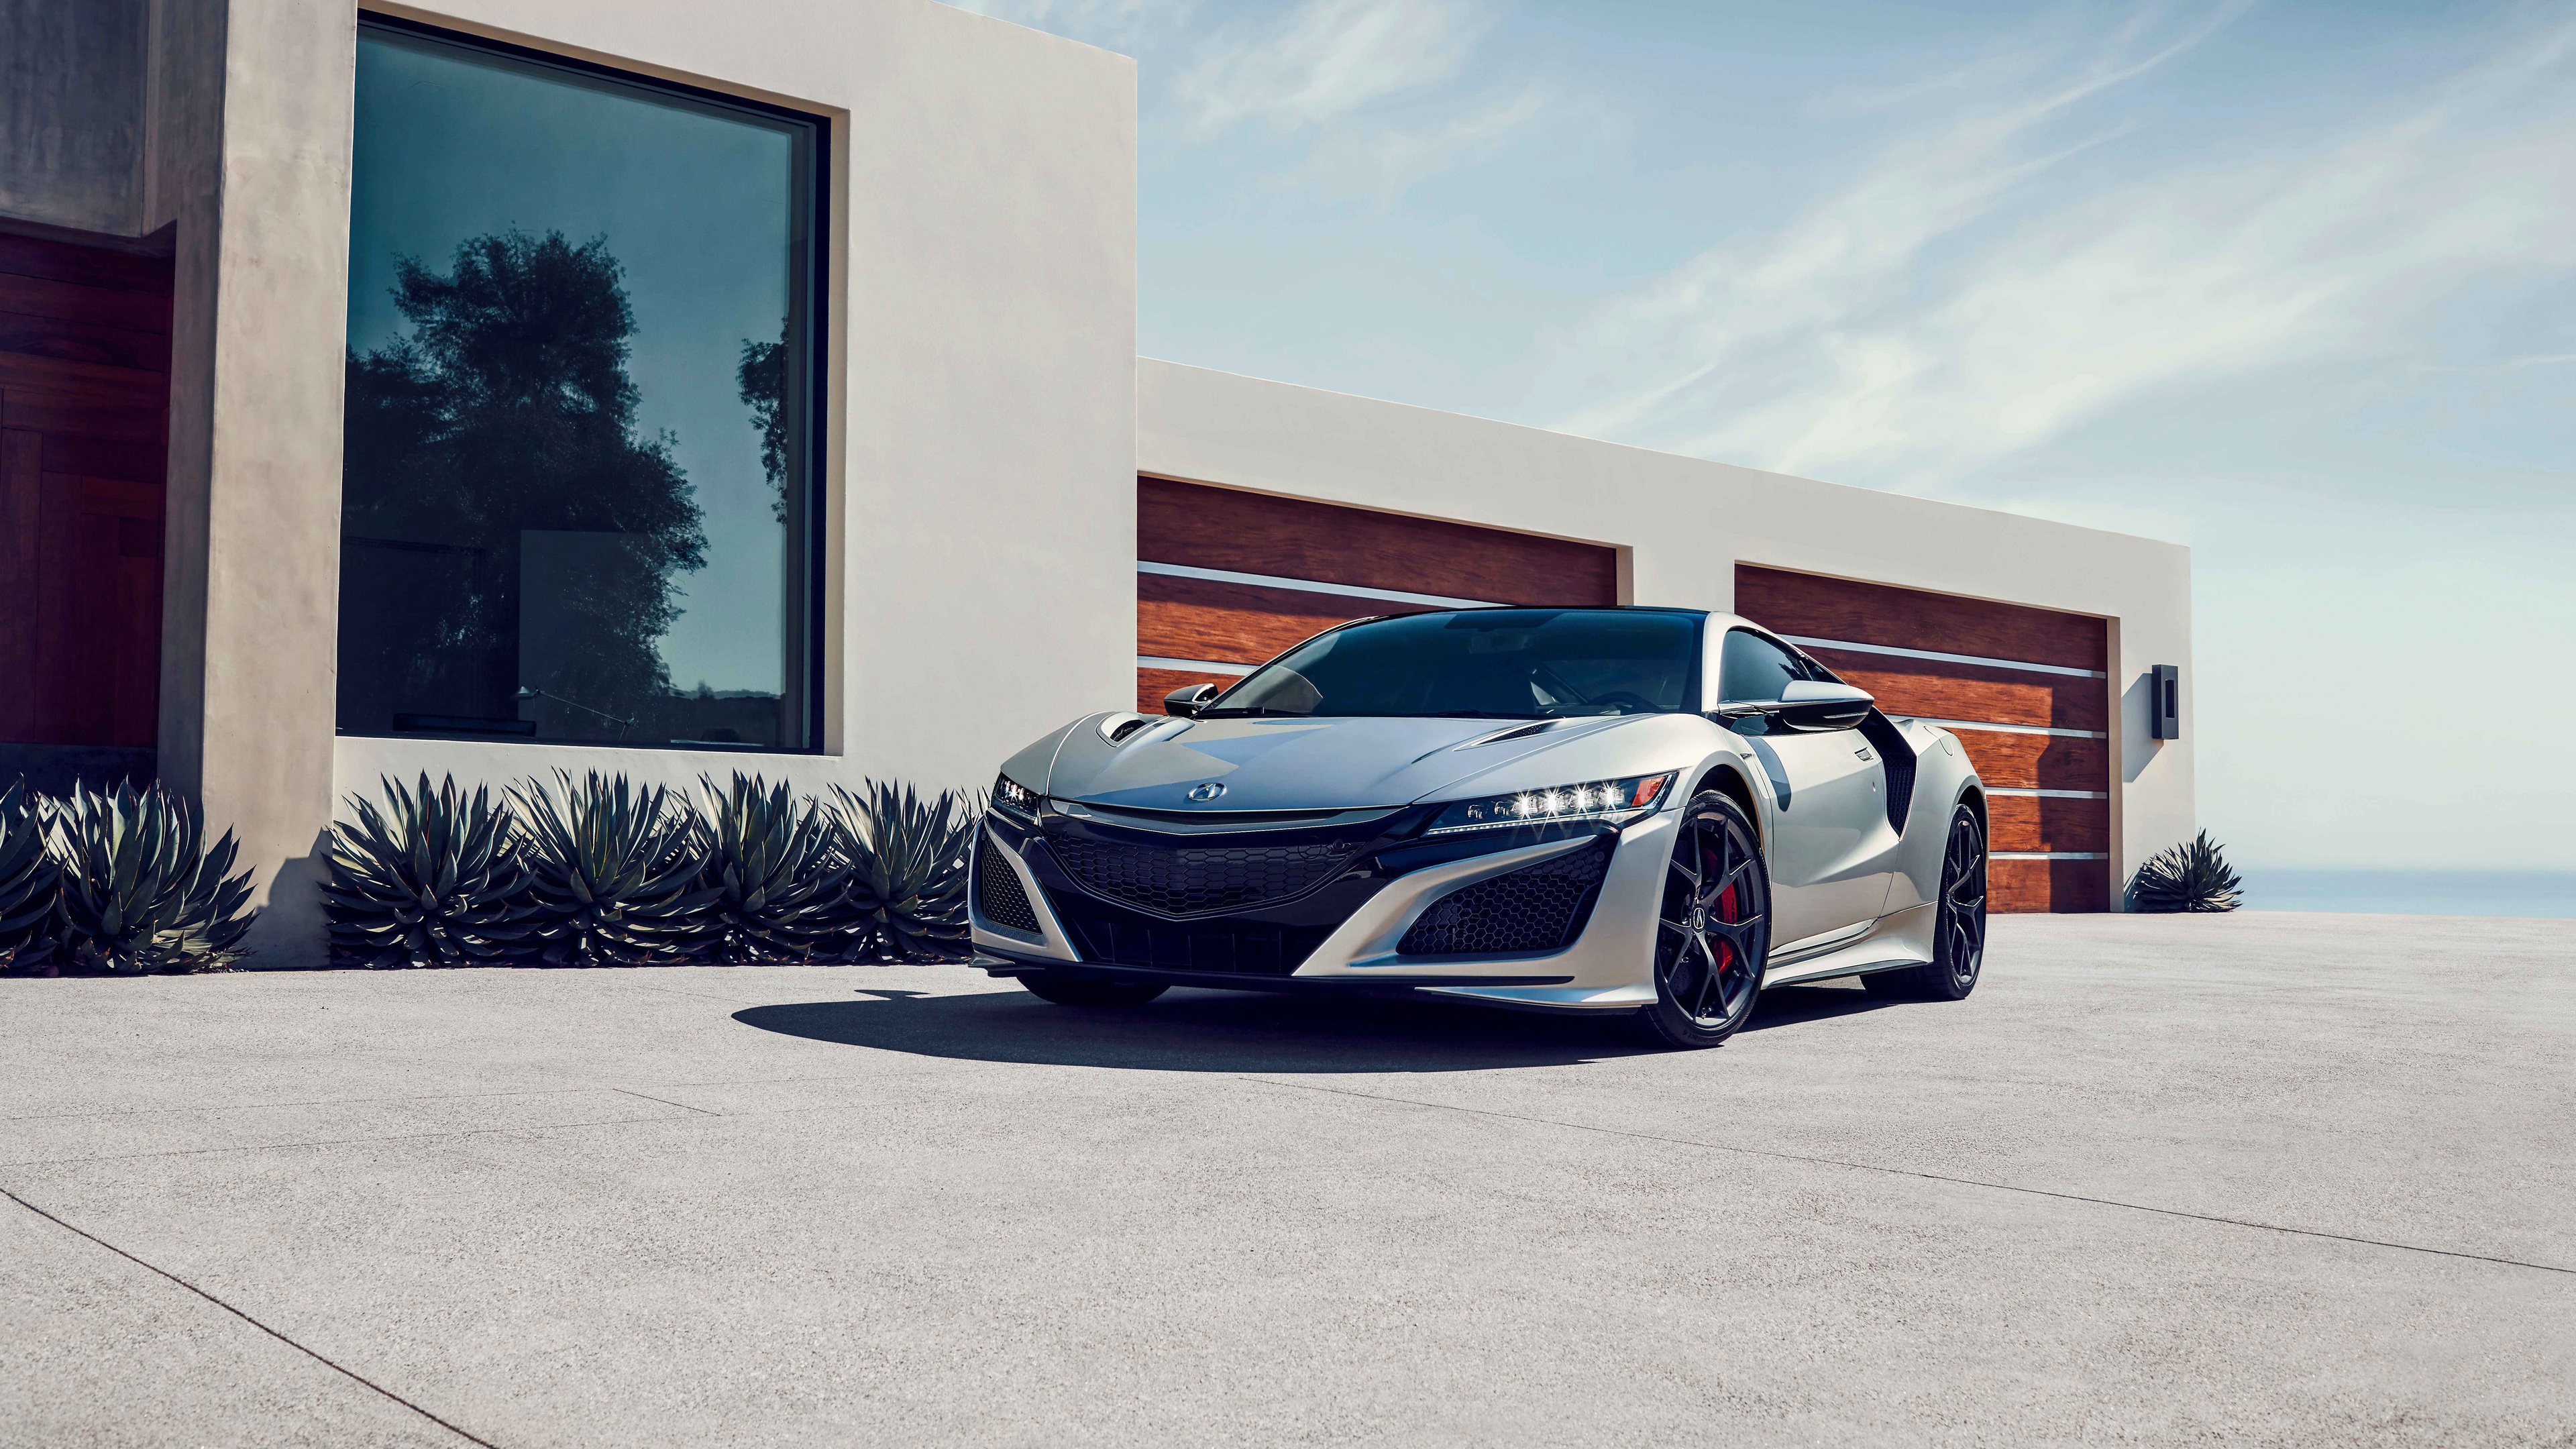 Acura Nsx 4k Ultra Hd Wallpaper Background Image 3840x2160